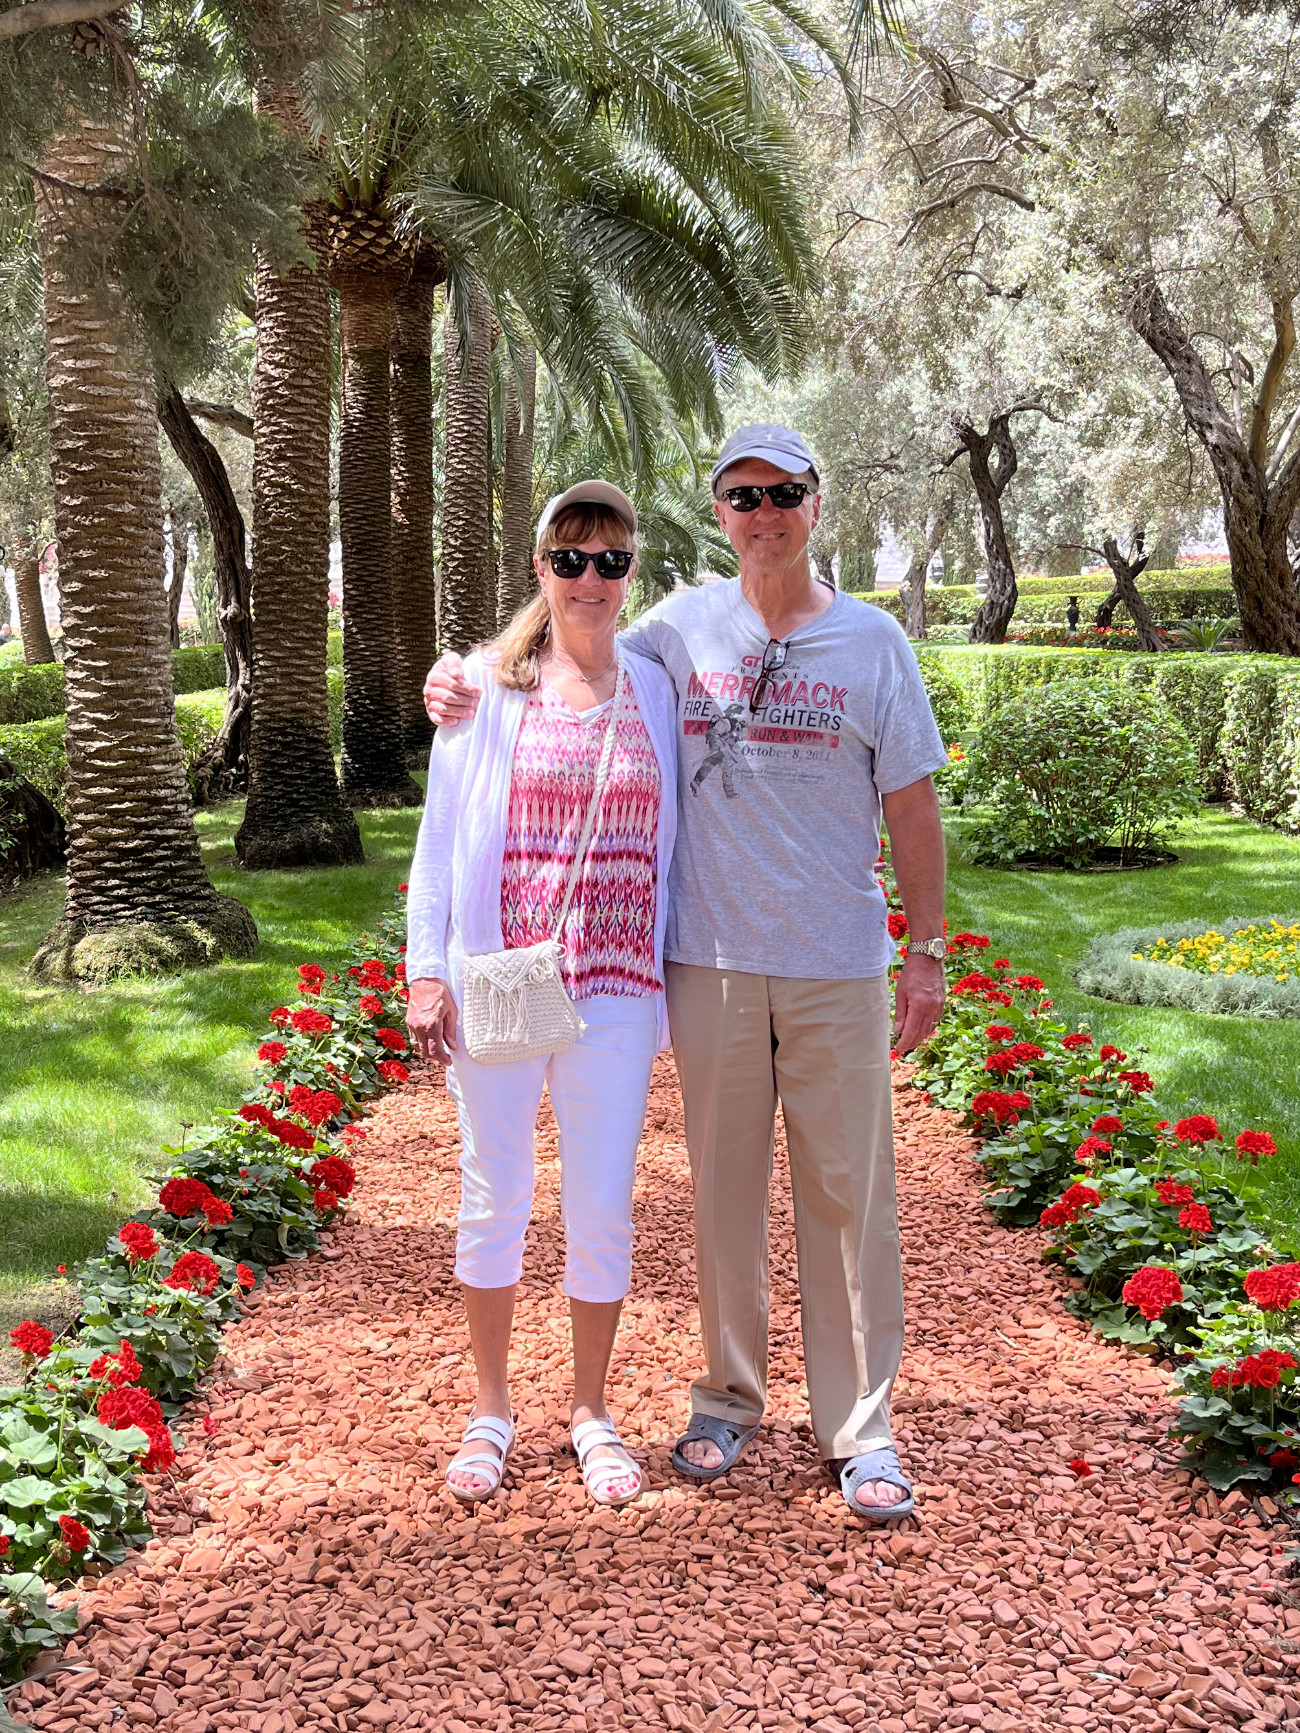 Mike and Kathy in Bahai Garden